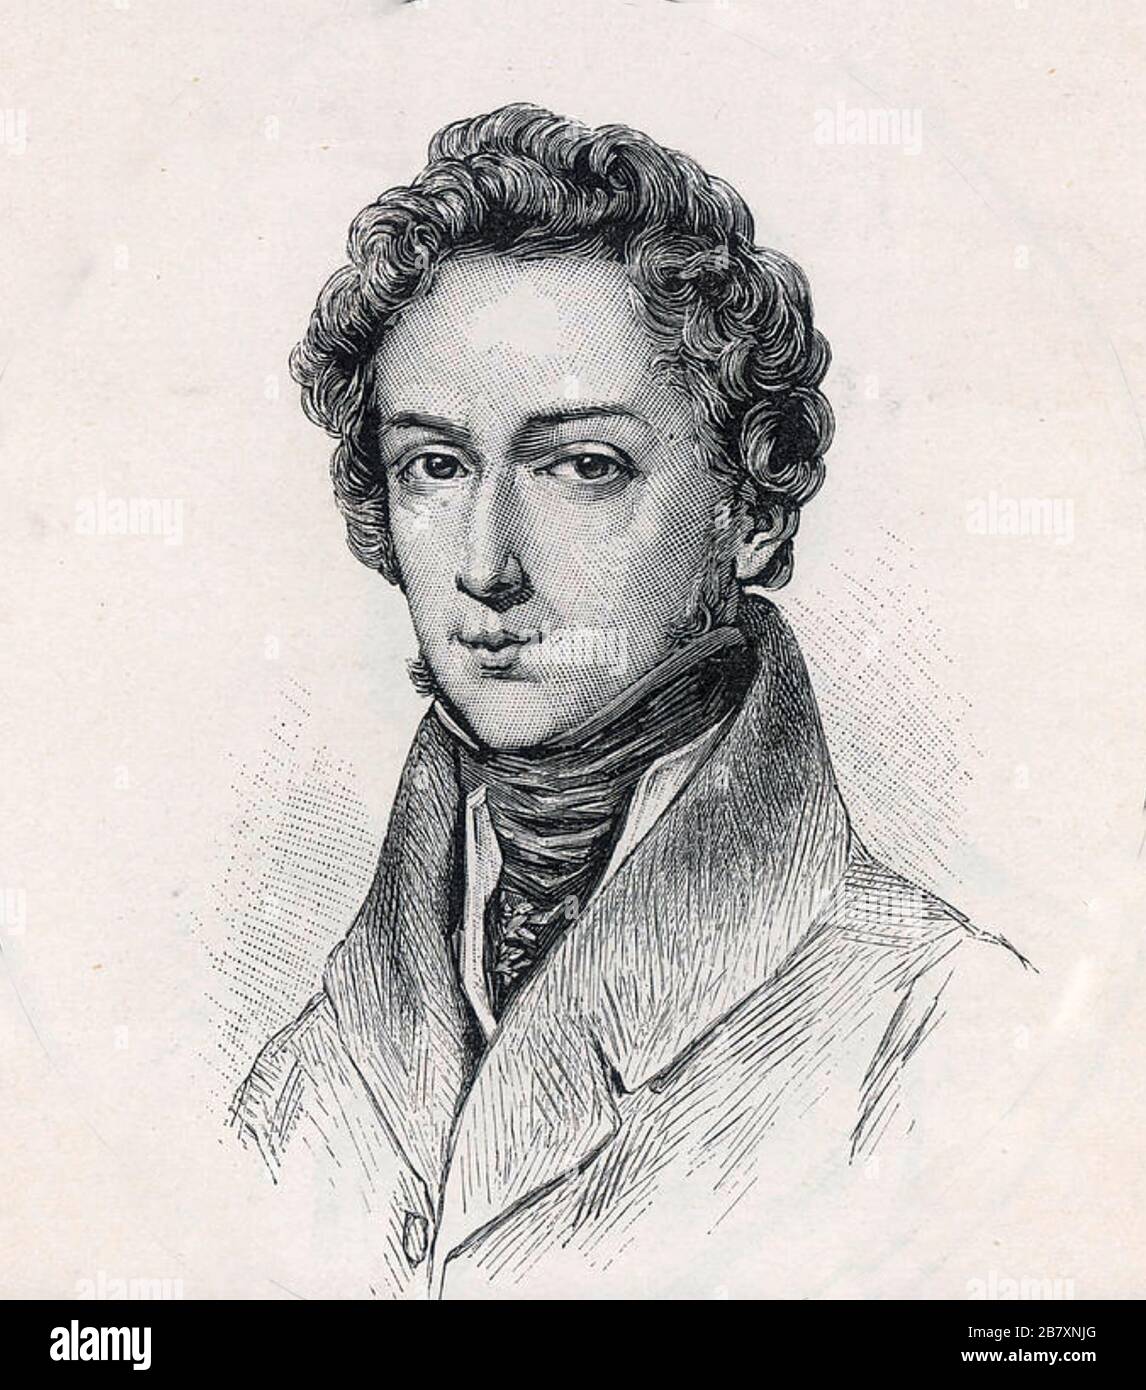 FREDERIC CHOPIN (1810-1849) Polish composer about 1830 Stock Photo